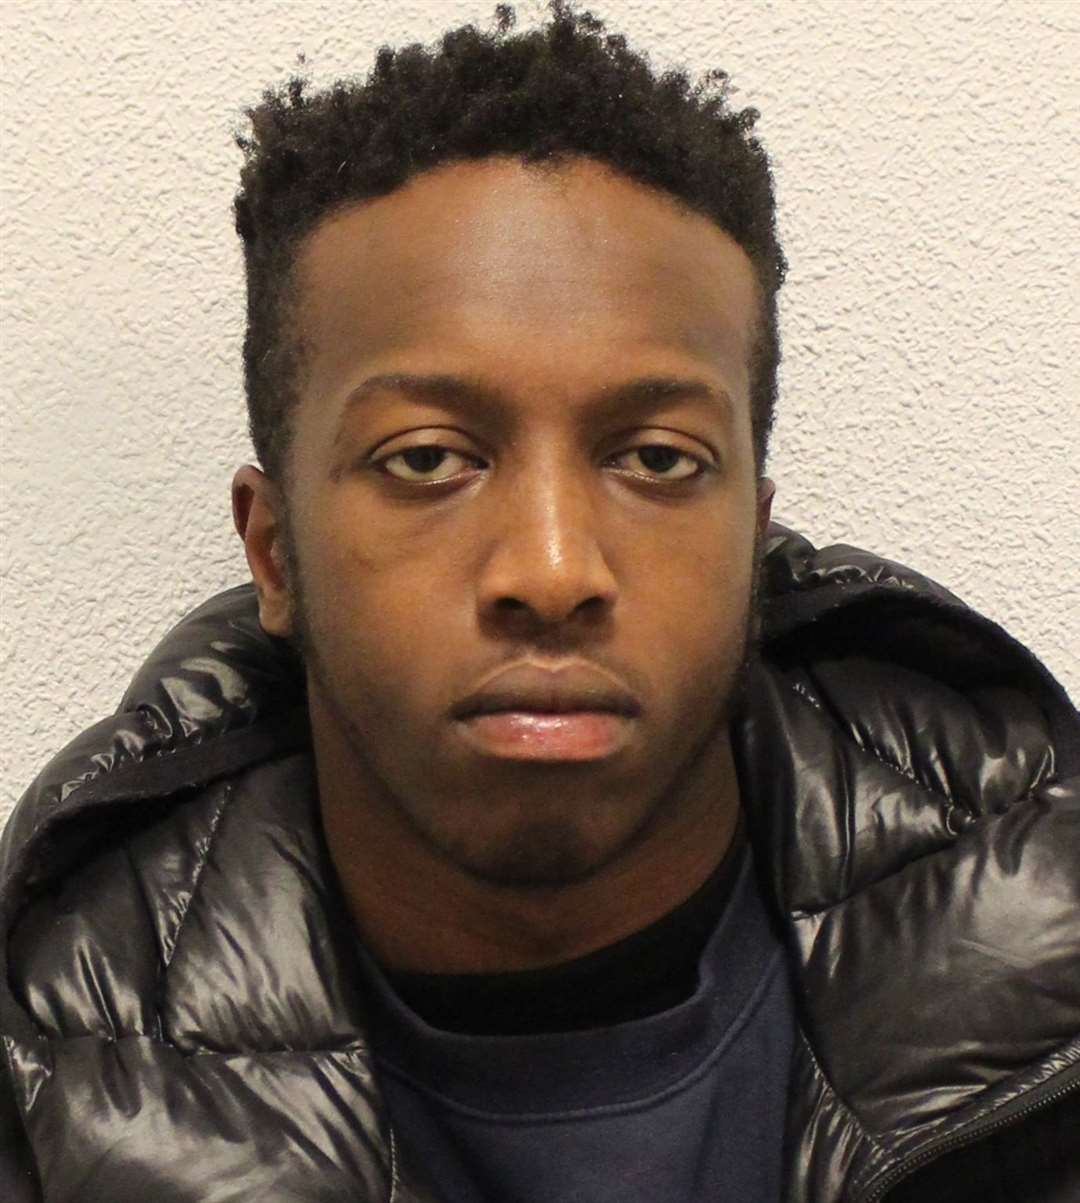 Harvey MacFoy, 26, of Beachborough Road, Bromley, was found guilty of the murder of 33-year-old Albert Amofa following a trial at the Old Bailey